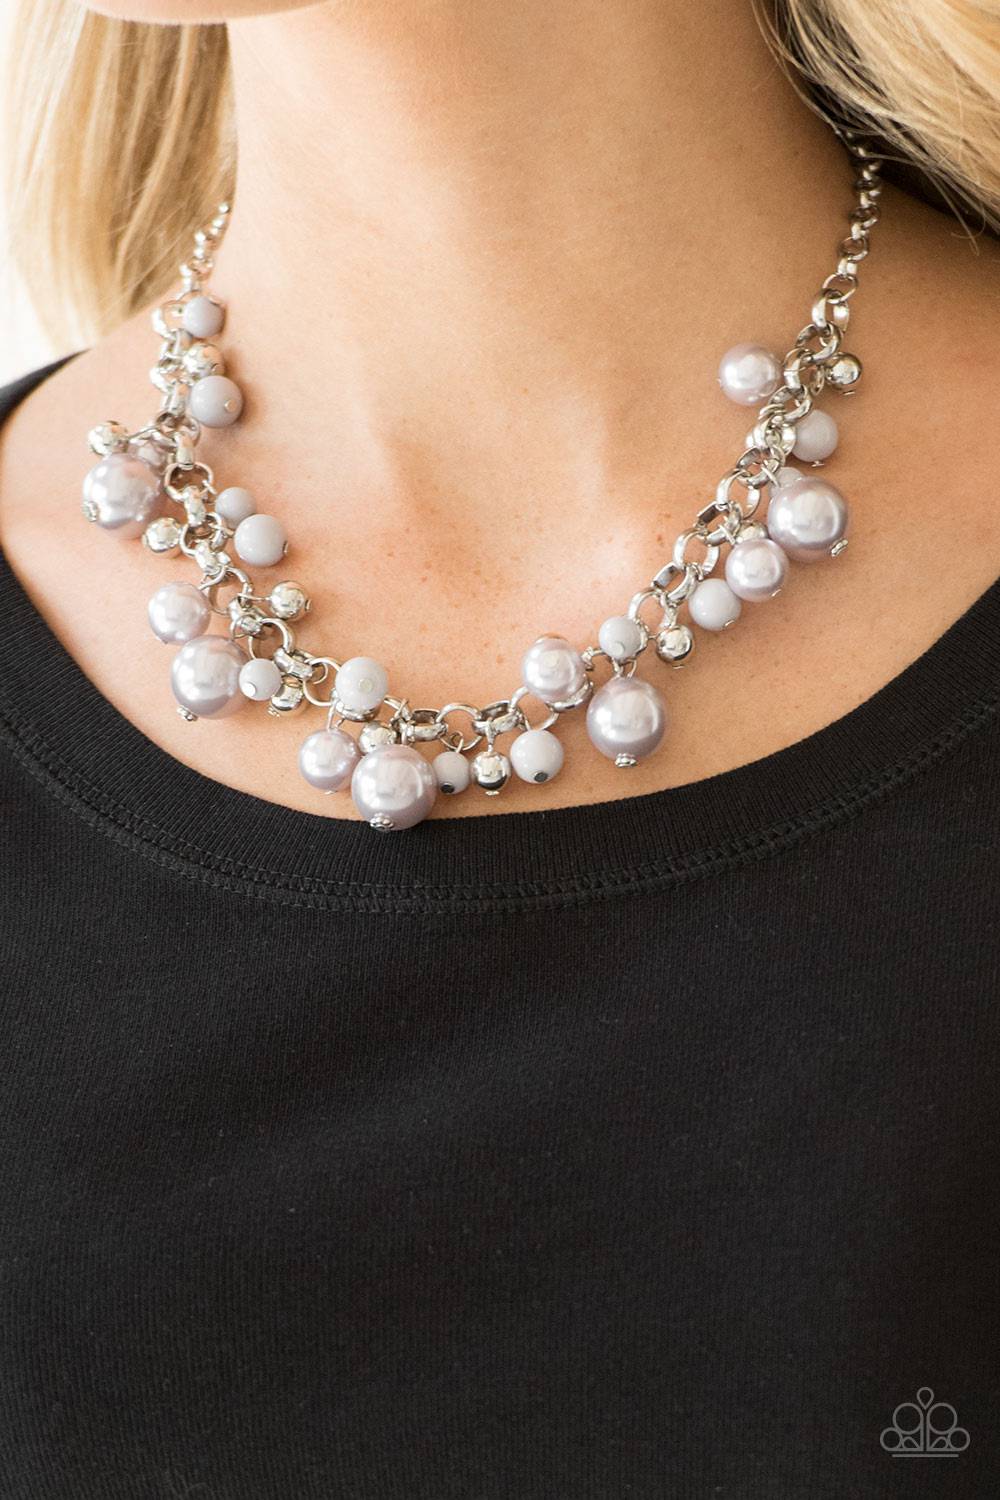 The Upstater - Silver Pearl Necklace - Paparazzi Accessories - GlaMarous Titi Jewels